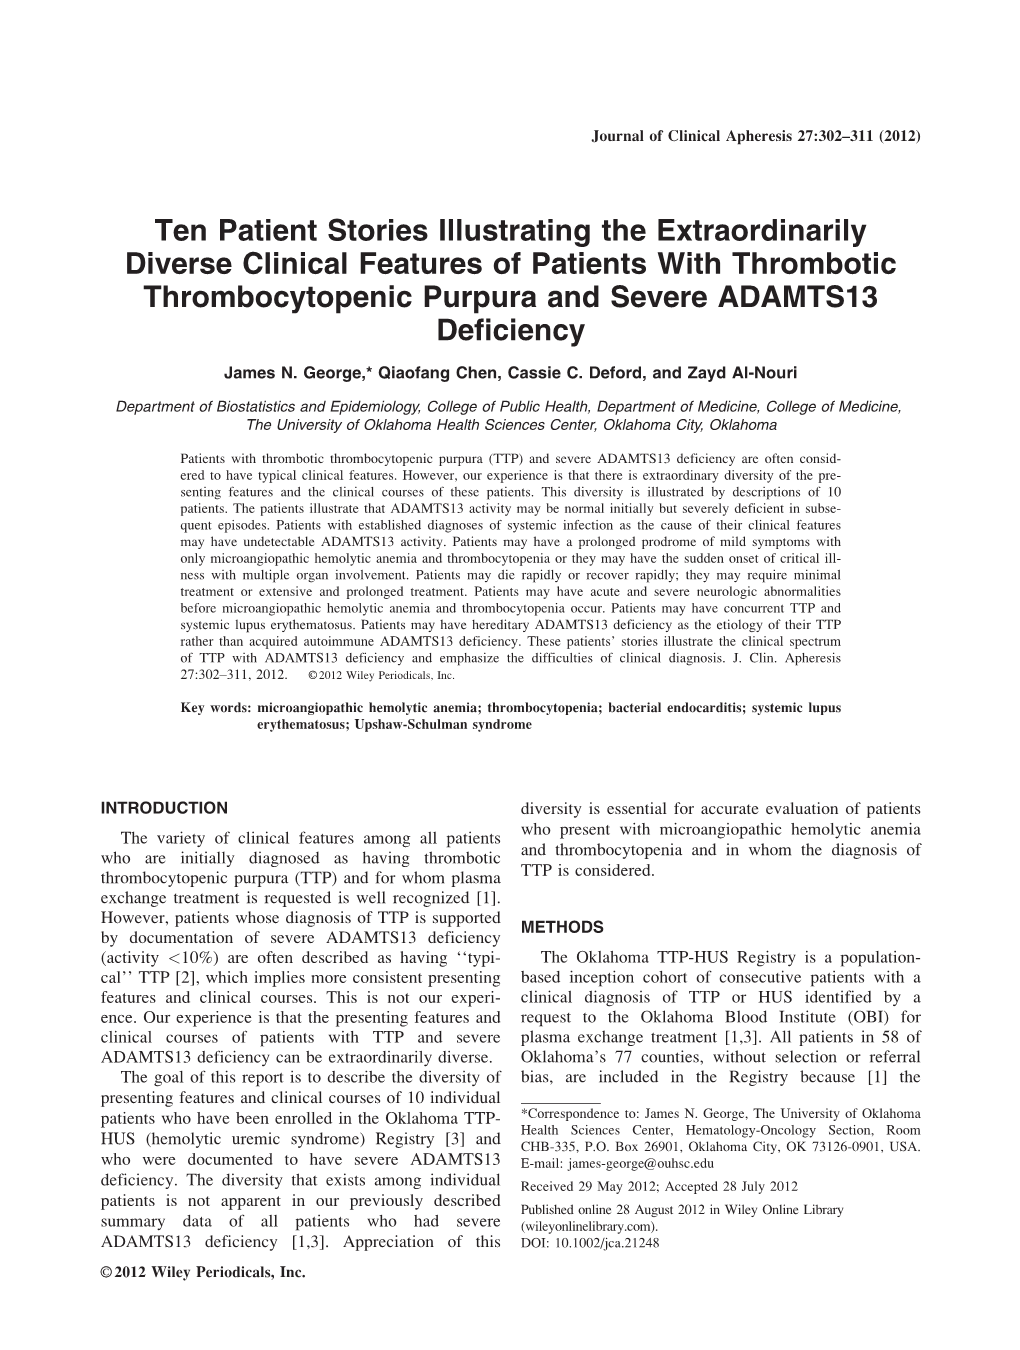 Ten Patient Stories Illustrating the Extraordinarily Diverse Clinical Features of Patients with Thrombotic Thrombocytopenic Purpura and Severe ADAMTS13 Deficiency